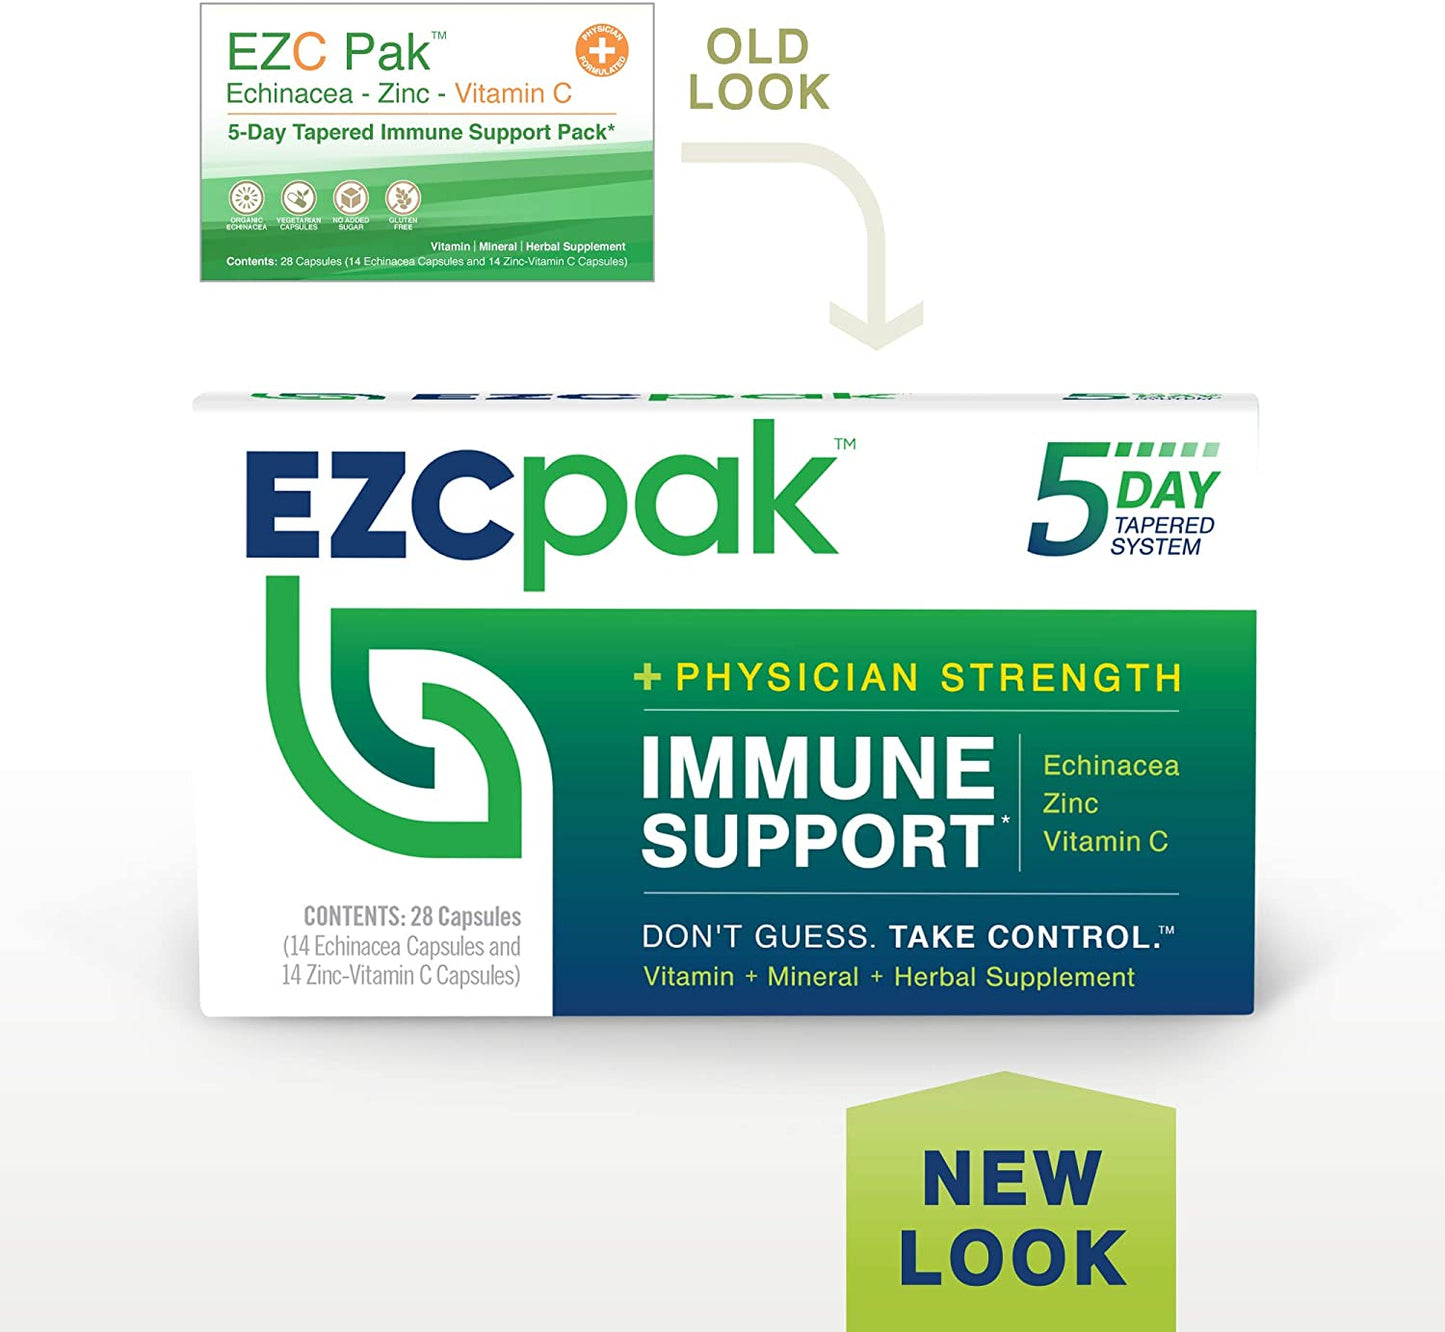 EZC Pak 5-Day Immune Support Pack Physician Strength Echinacea Zinc Vitamin C old packaging versus new packaging